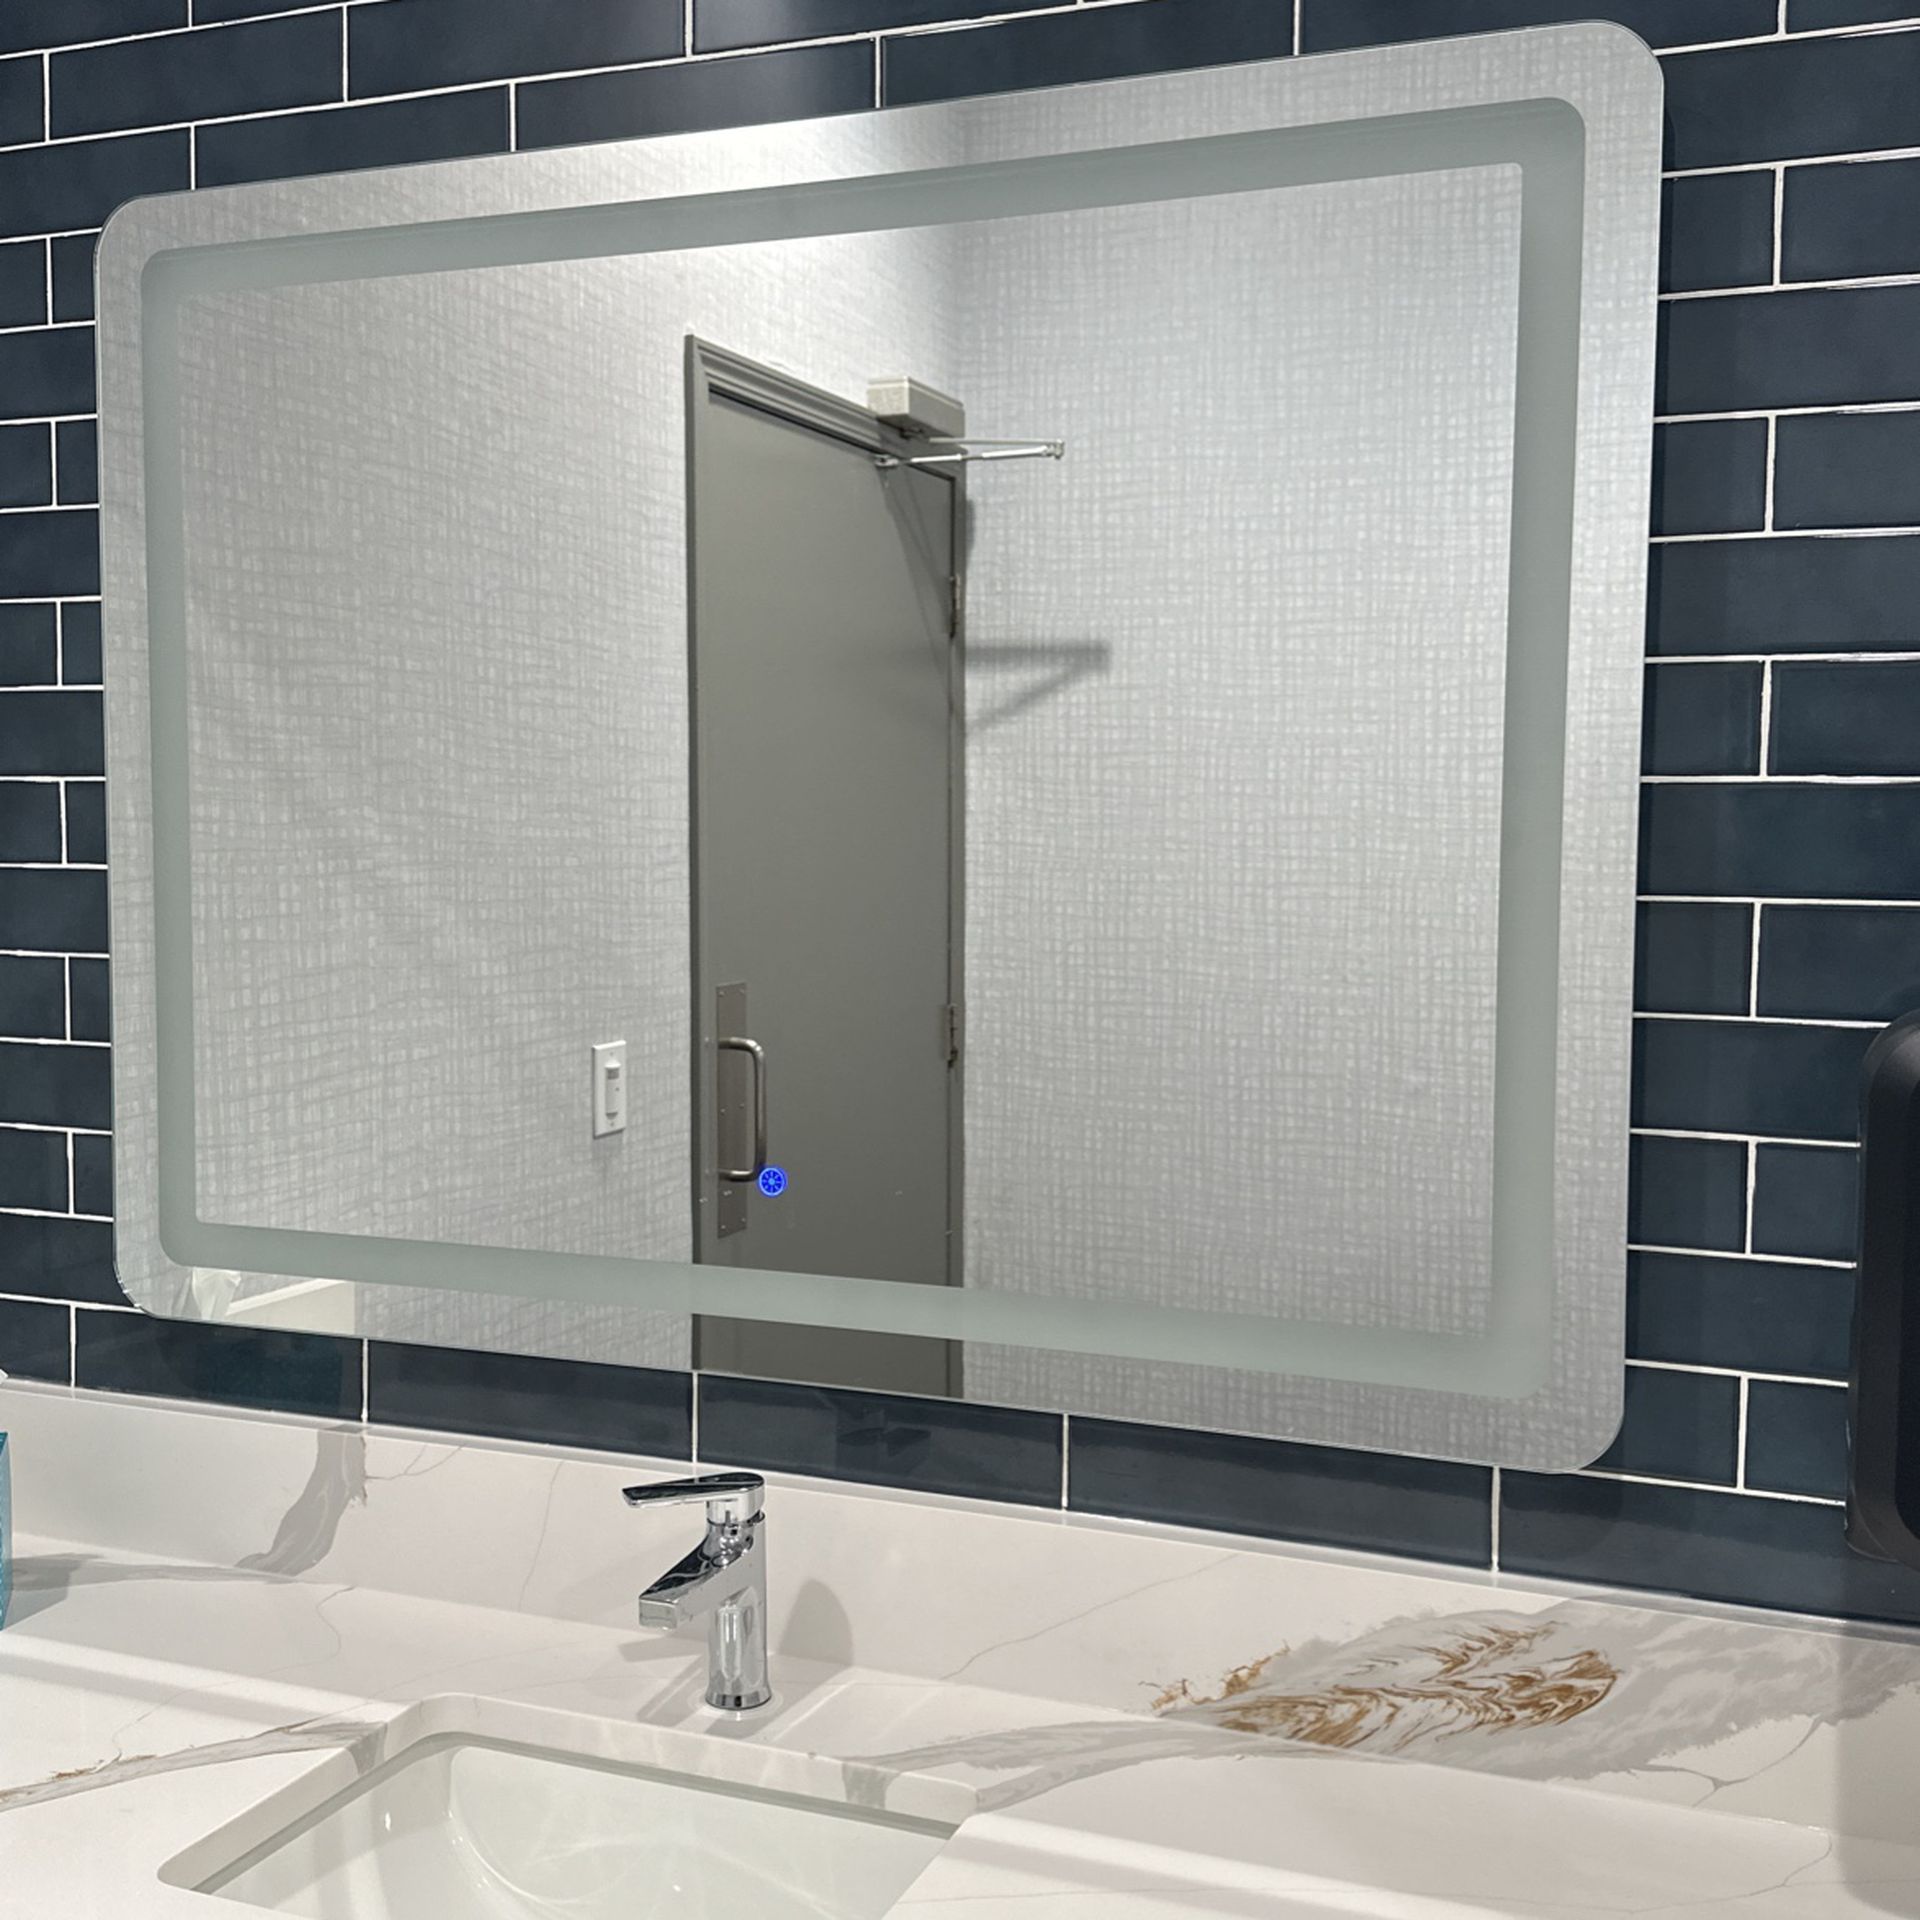 LED BATHROOM MIRROR For Home Or Business 